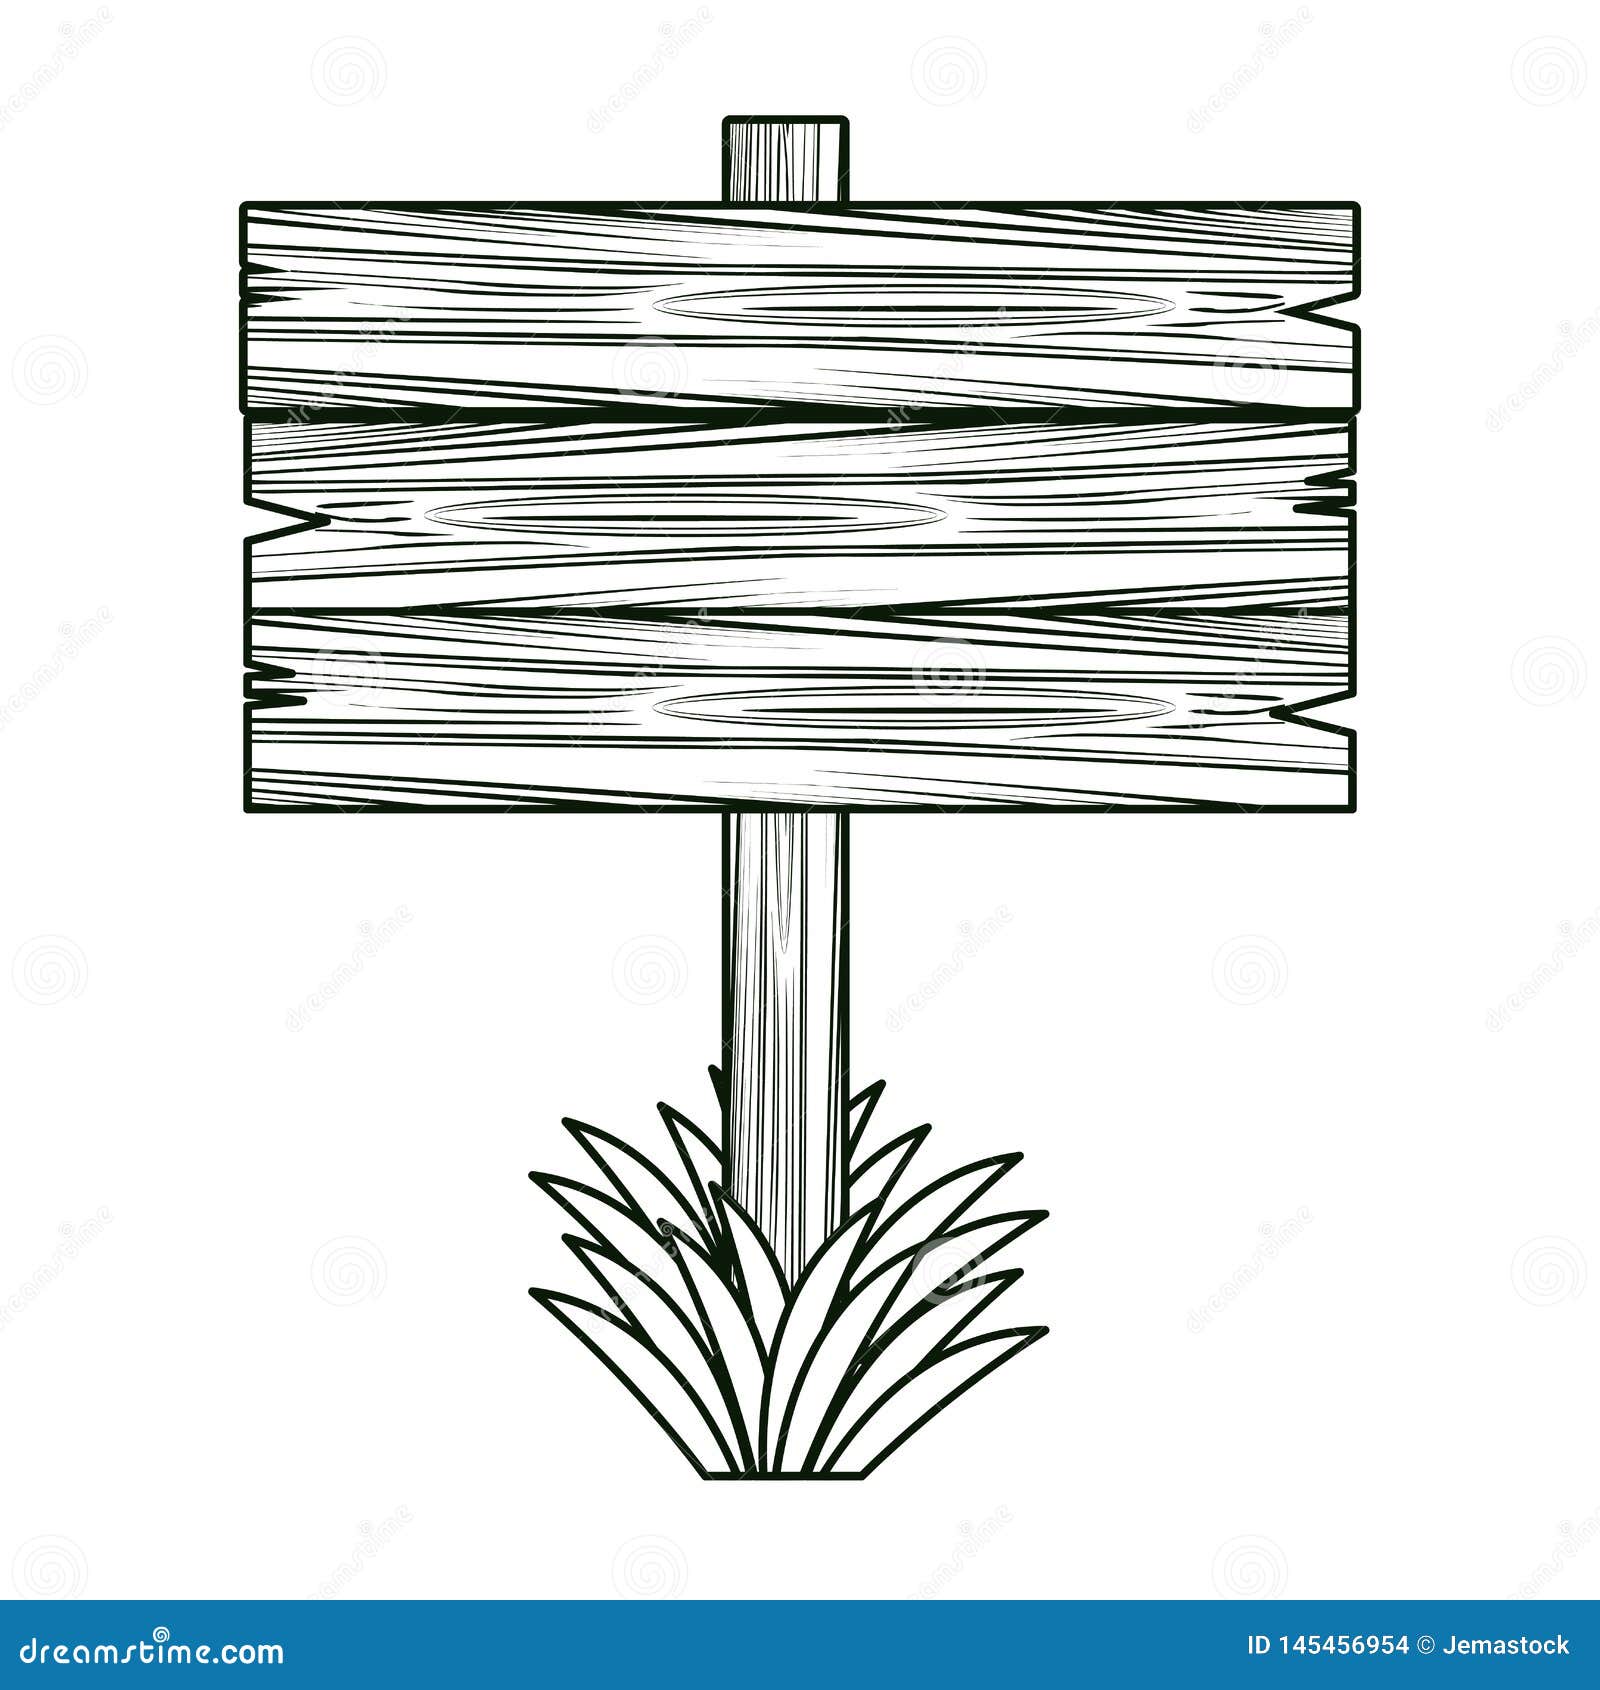 Blank wooden sign stock vector. Illustration of image - 145456954